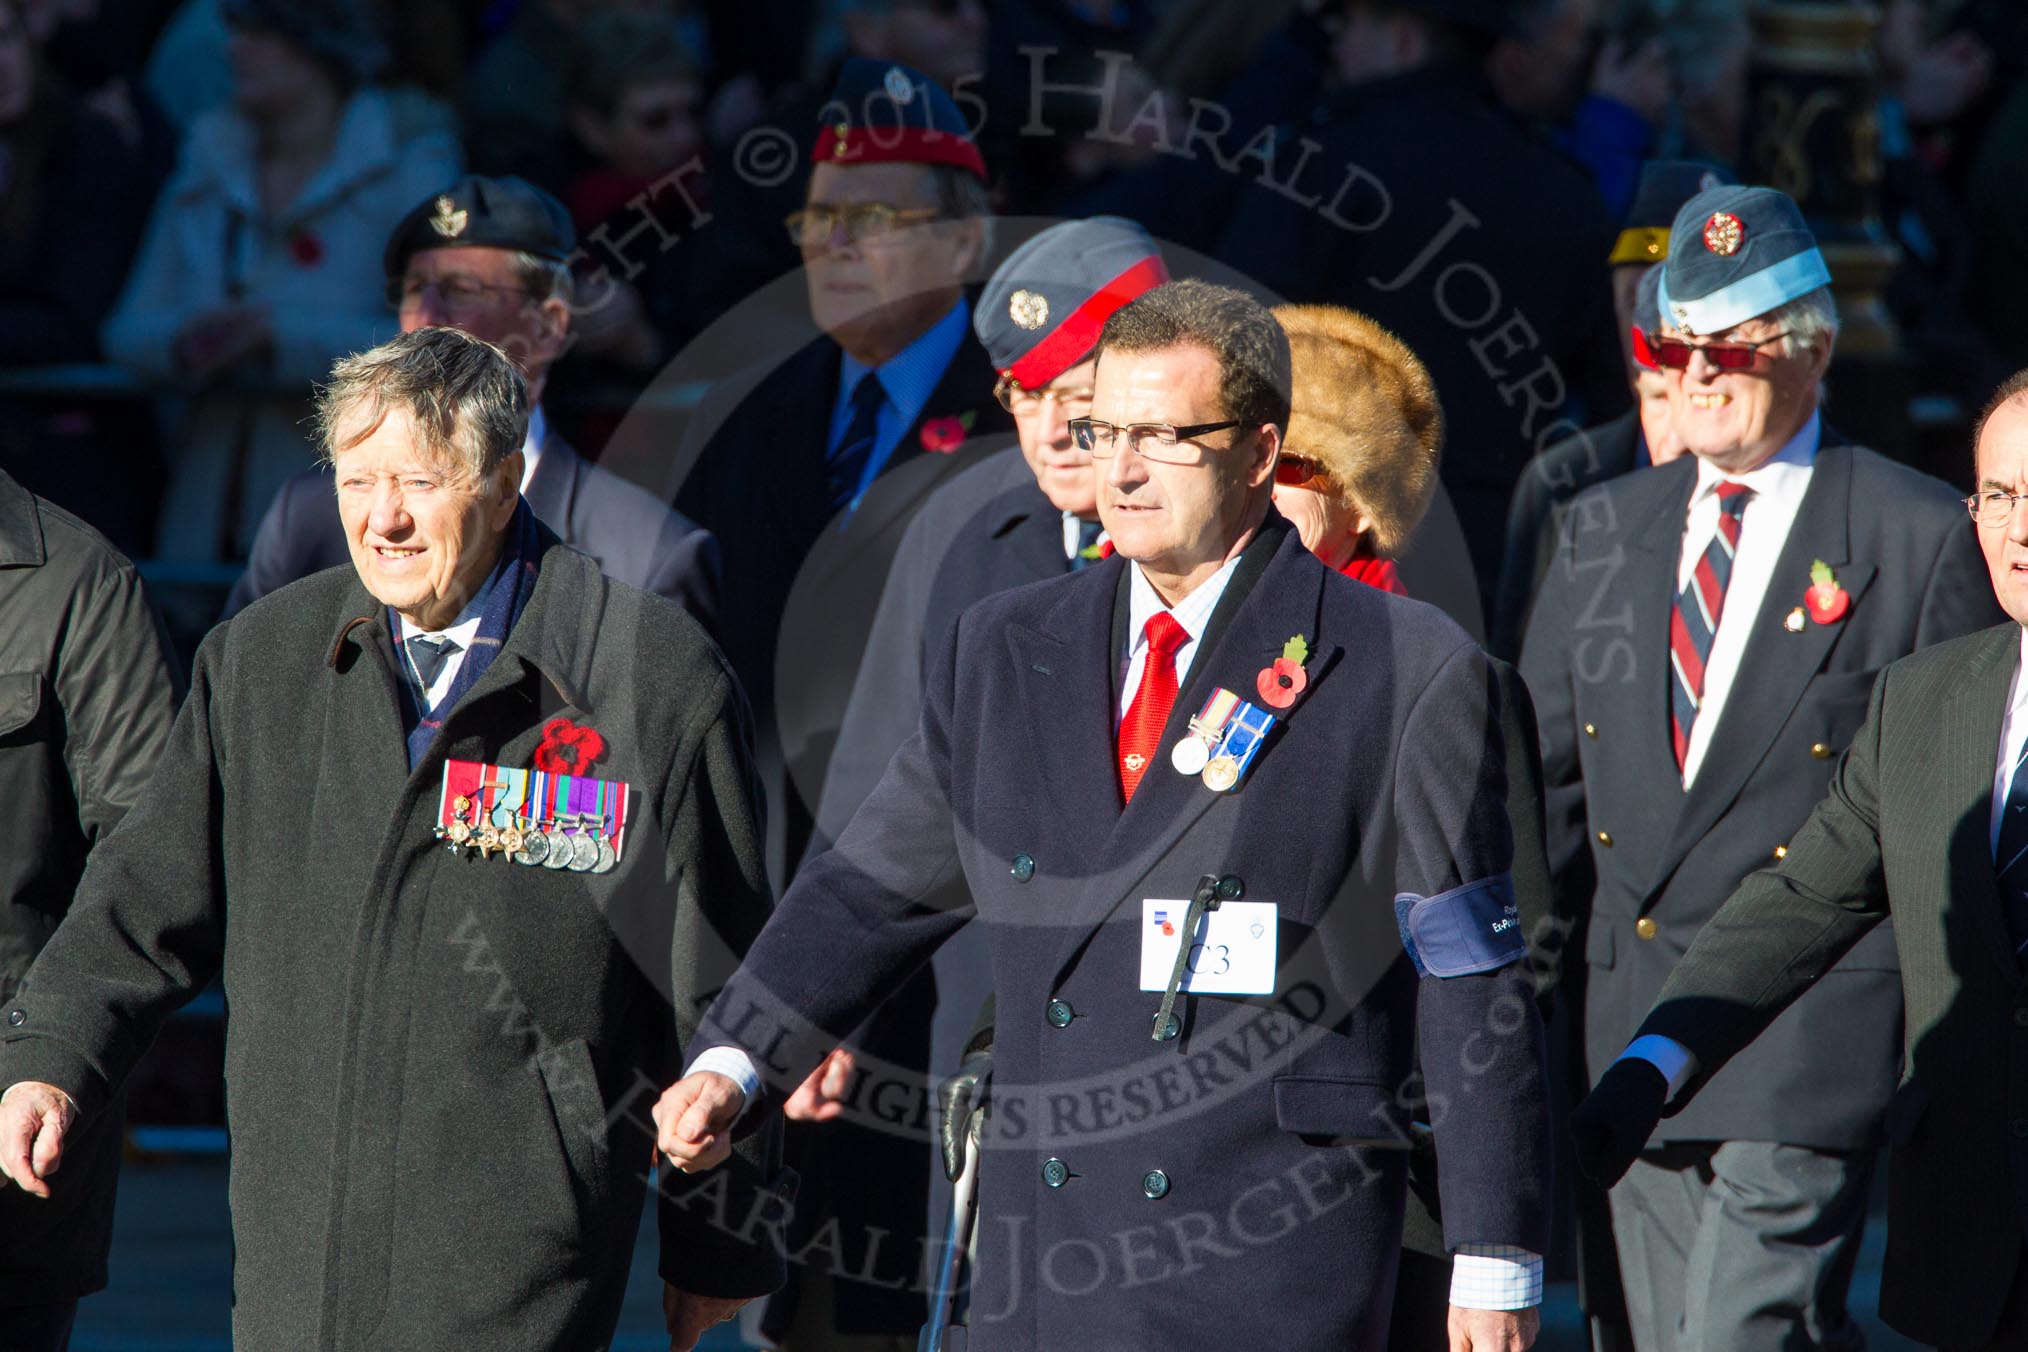 Remembrance Sunday Cenotaph March Past 2013: C3 - Royal Air Forces Ex-Prisoner's of War Association..
Press stand opposite the Foreign Office building, Whitehall, London SW1,
London,
Greater London,
United Kingdom,
on 10 November 2013 at 12:06, image #1698